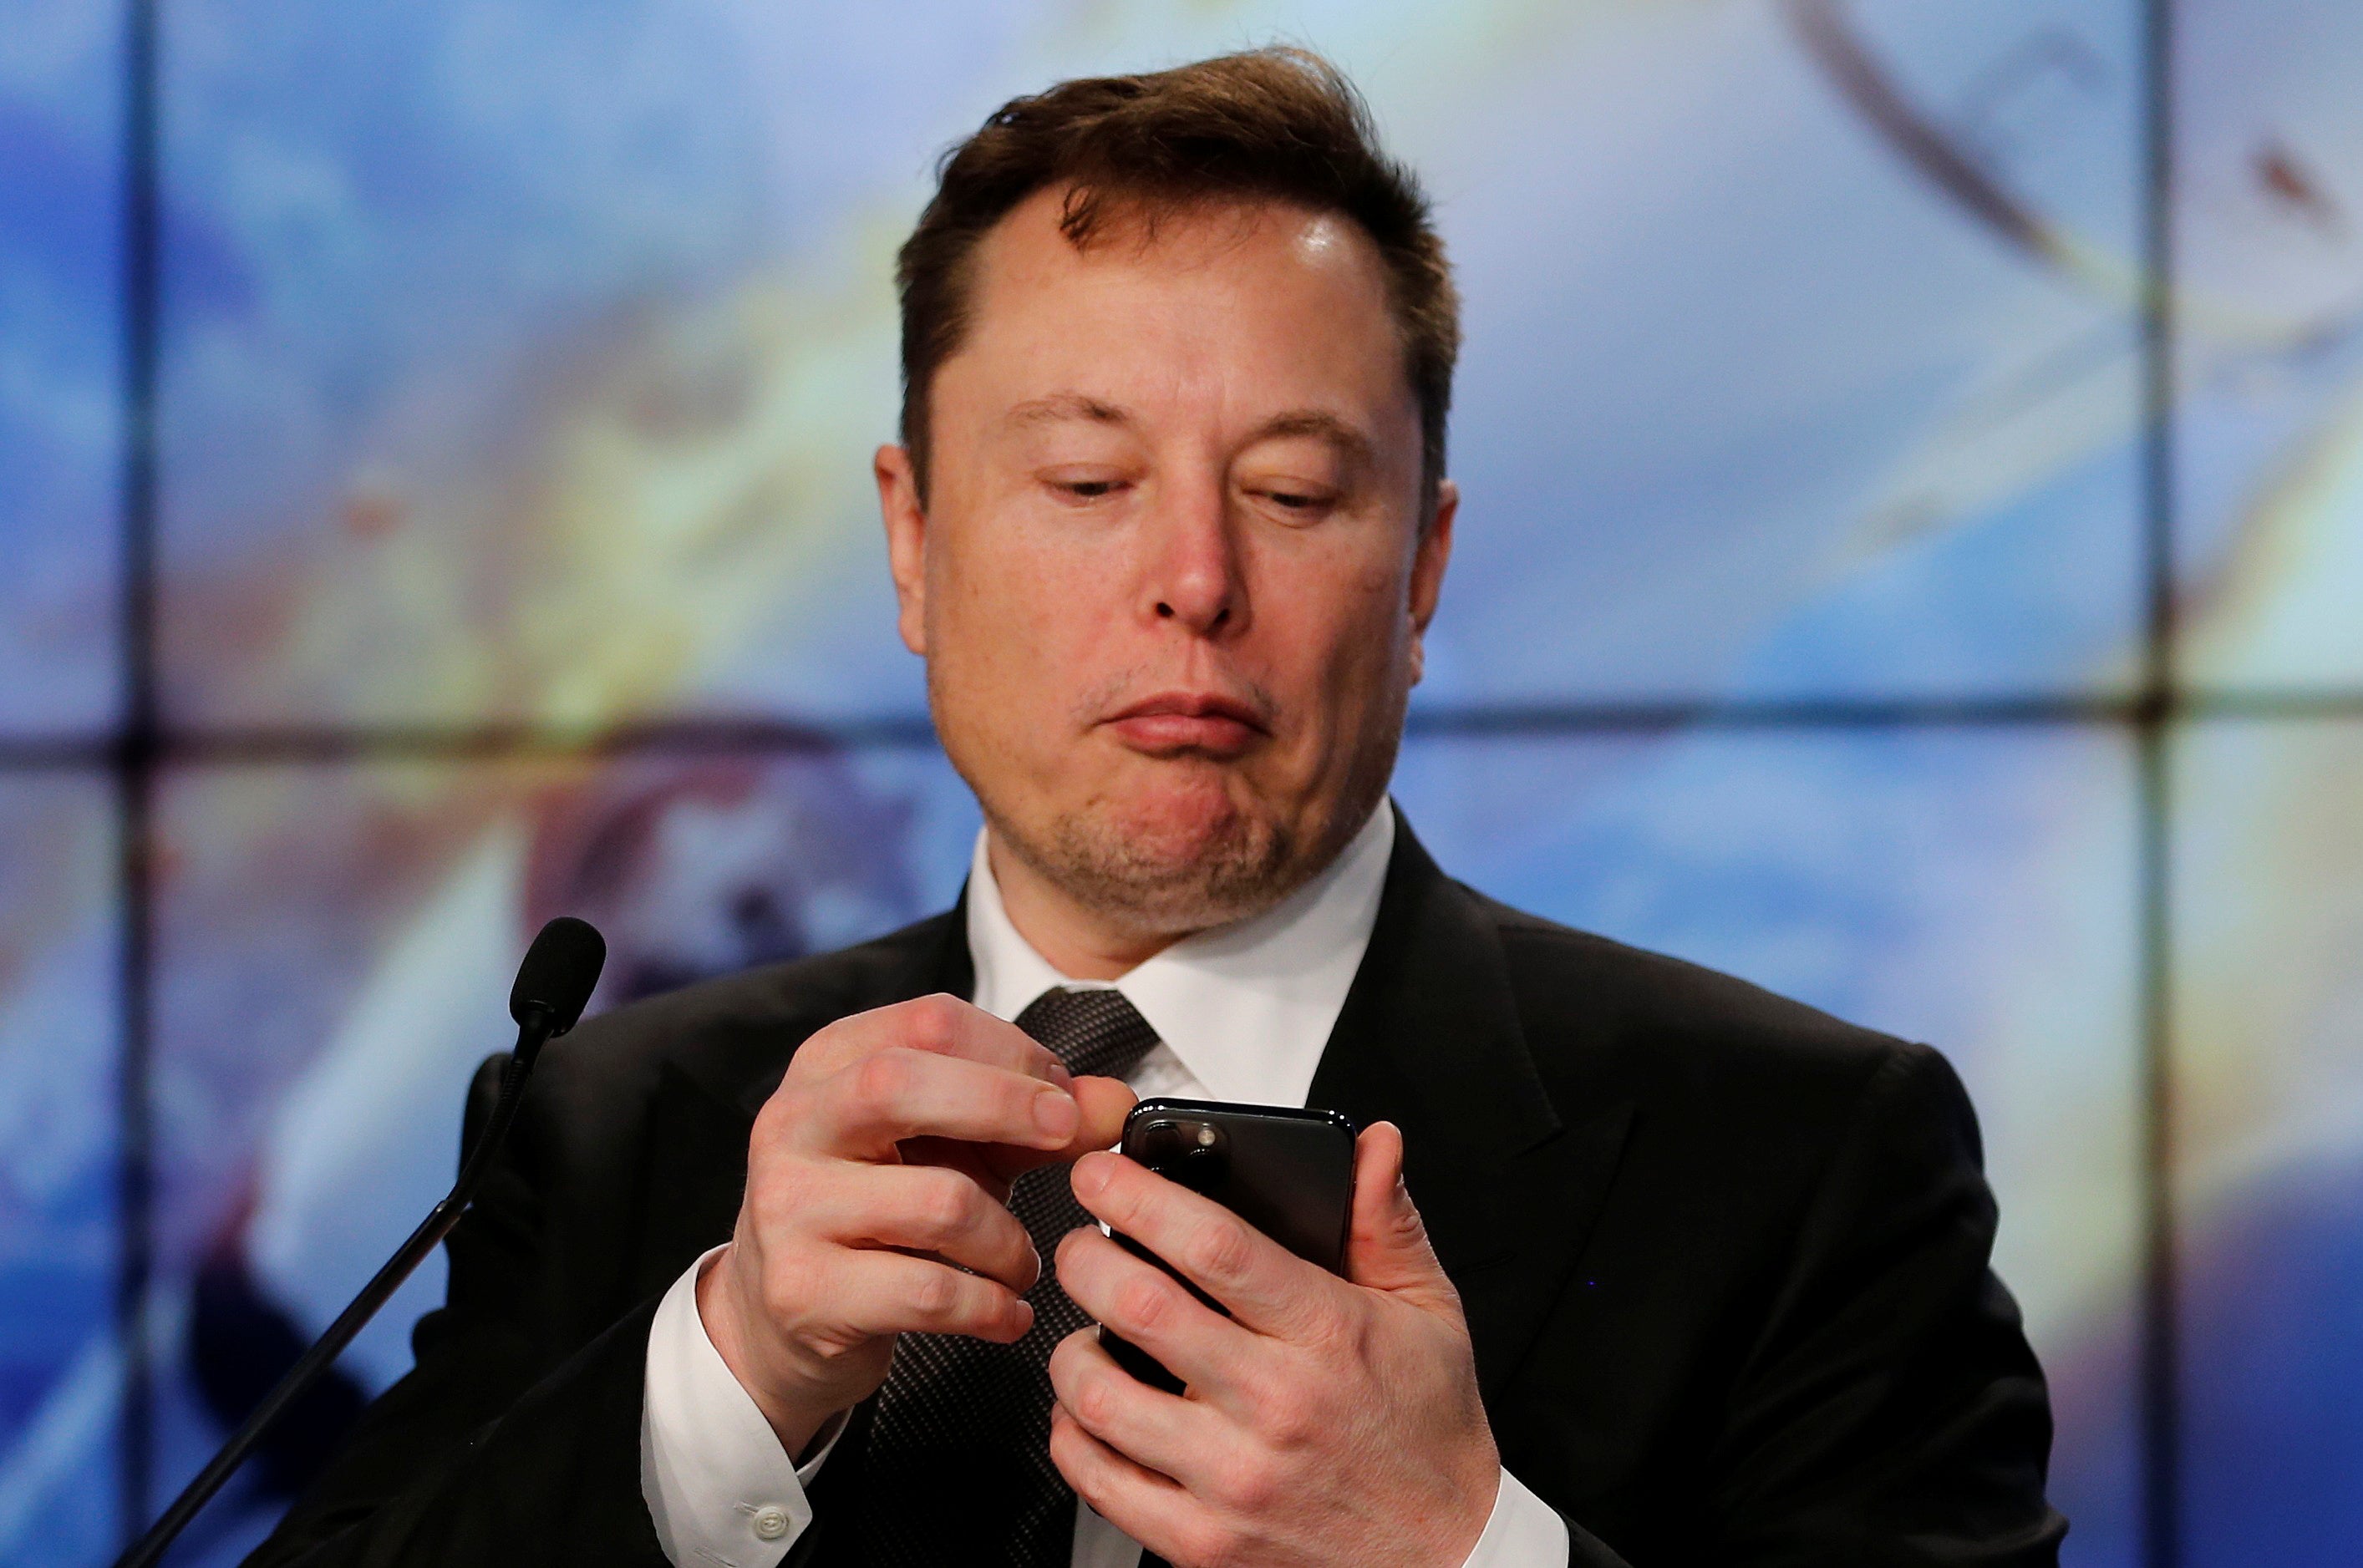 Elon Musk looks at his phone during a post-launch news conference to discuss a SpaceX Crew test. The Kremlin has not publicly responded to his request